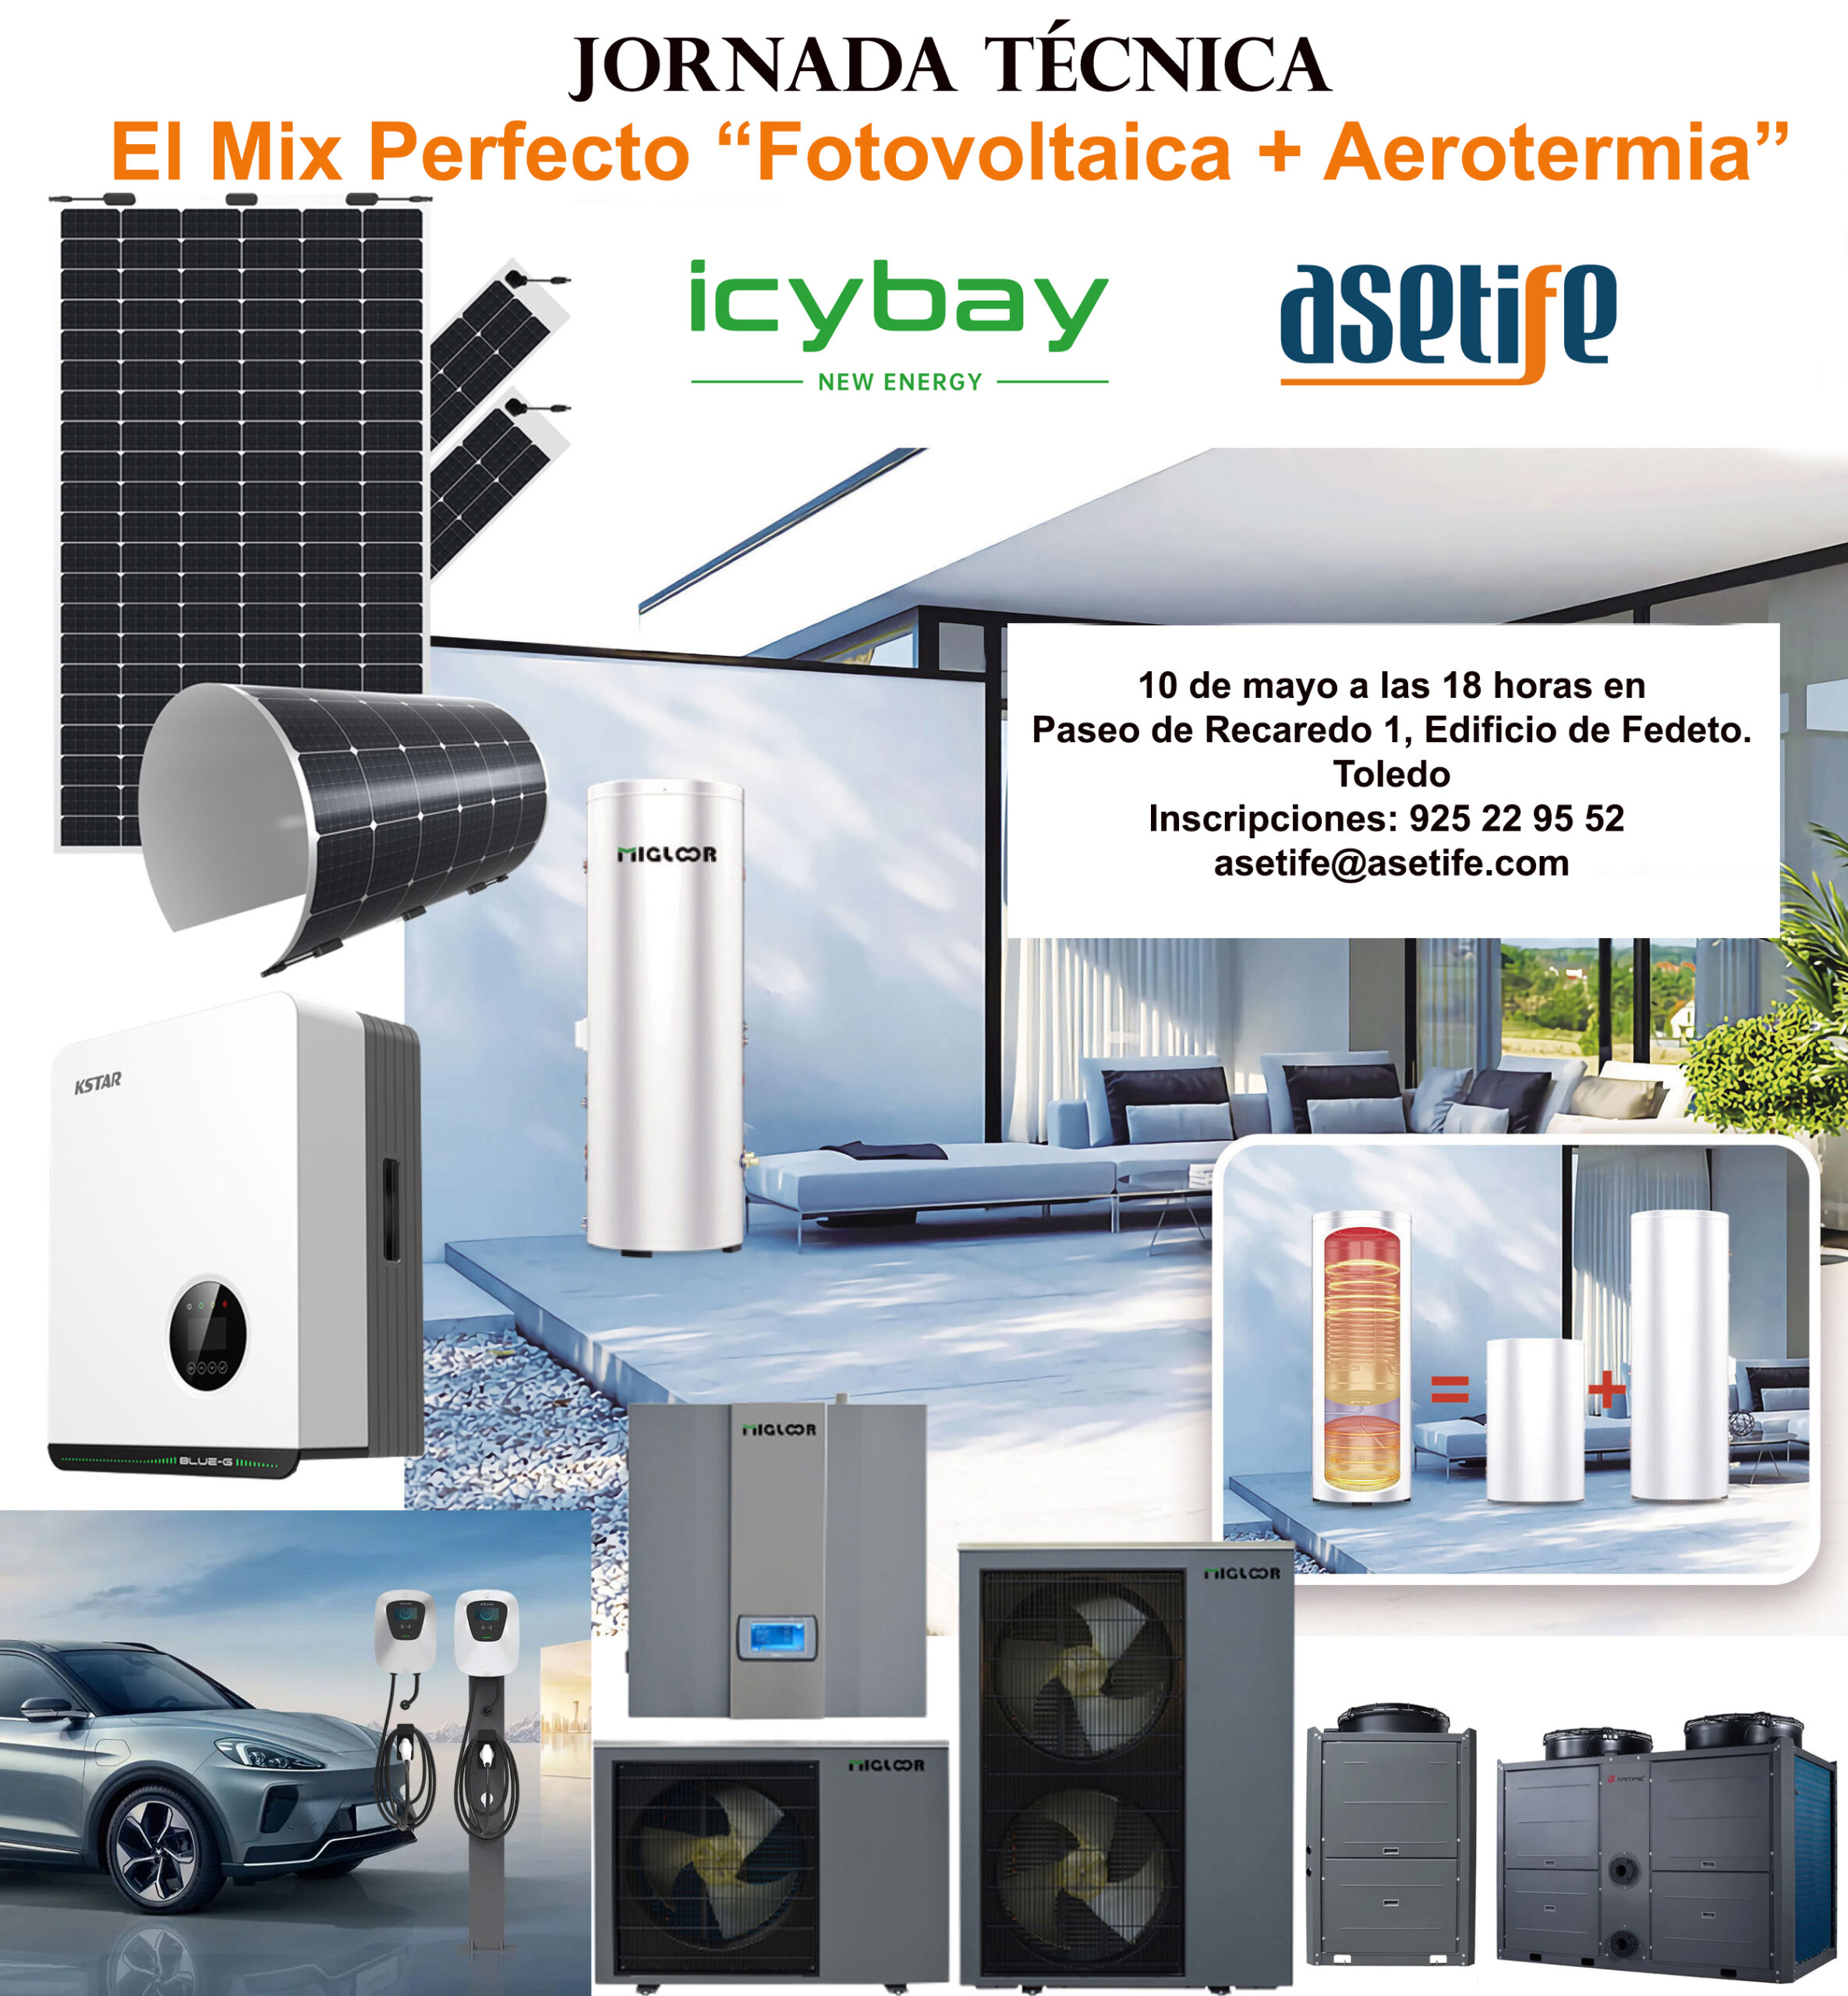 Conference organized by #Icybay🌞🌀 «THE perfect mix» Energy #Photovoltaic + #Aerotermia 🌞🌀